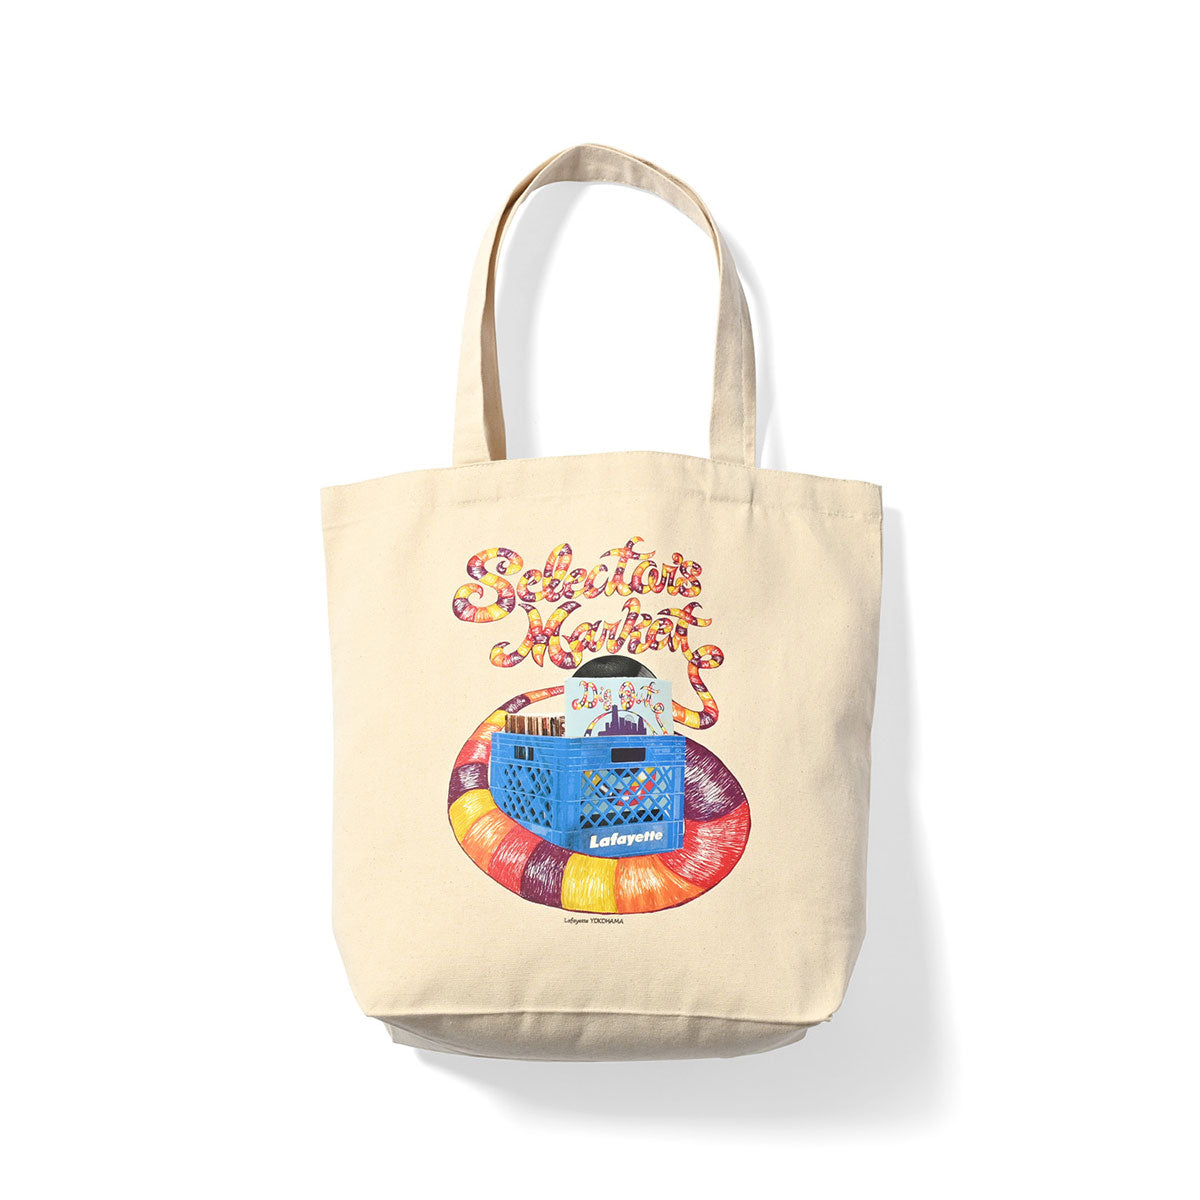 LE231501 SELECTOR'S MARKET "Dig Out" TOTE BAG